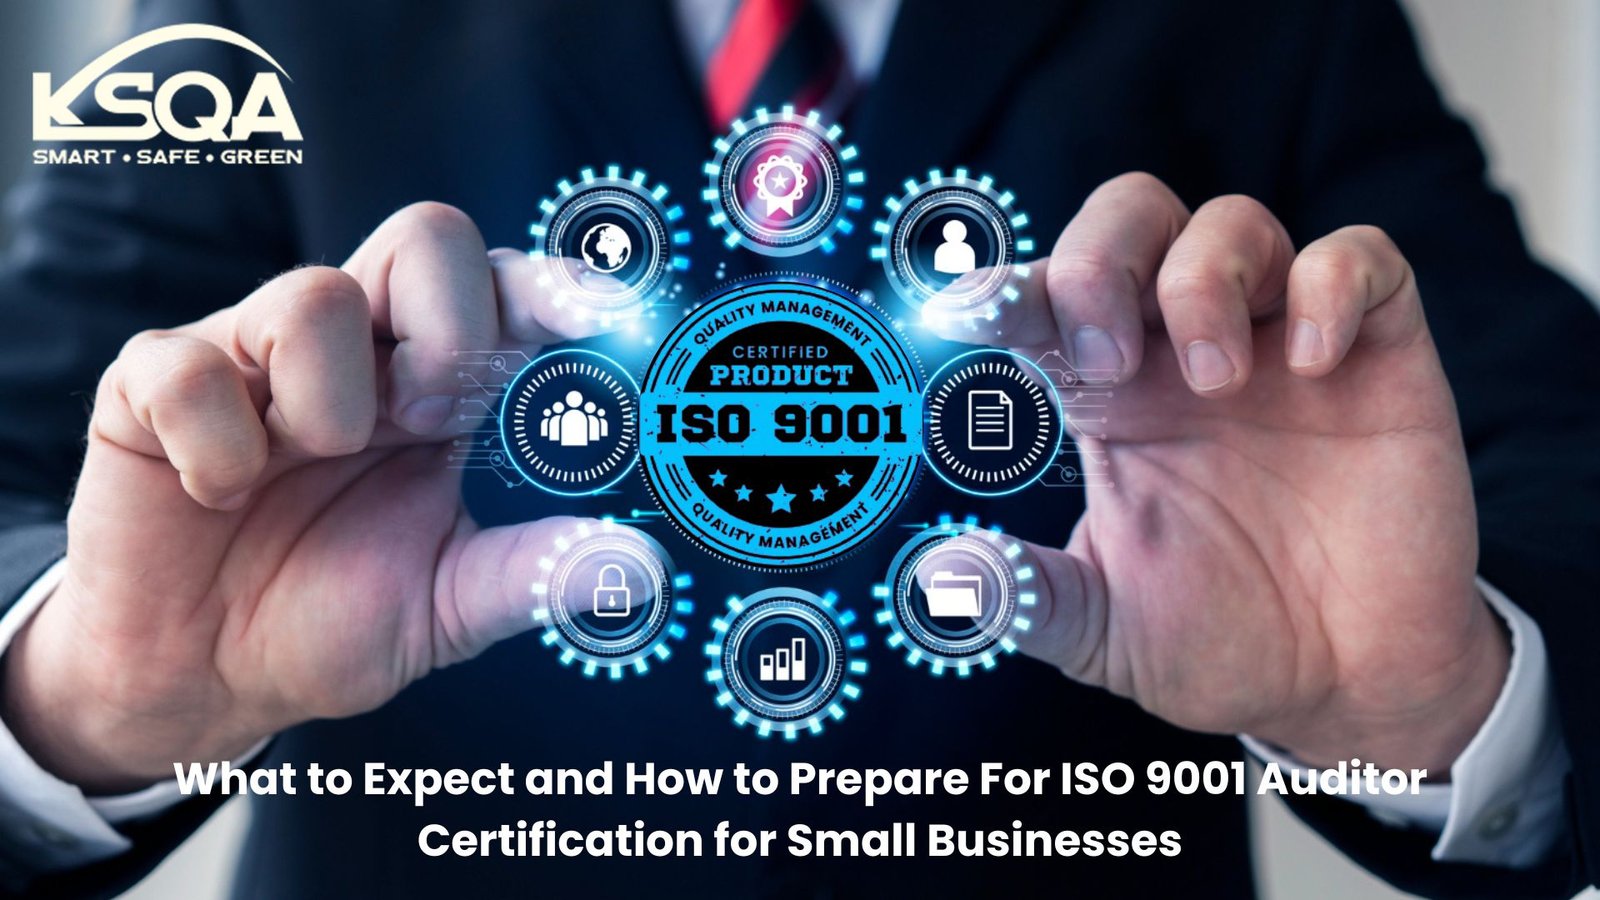 What to Expect and How to Prepare For ISO 9001 Auditor Certification for Small Businesses